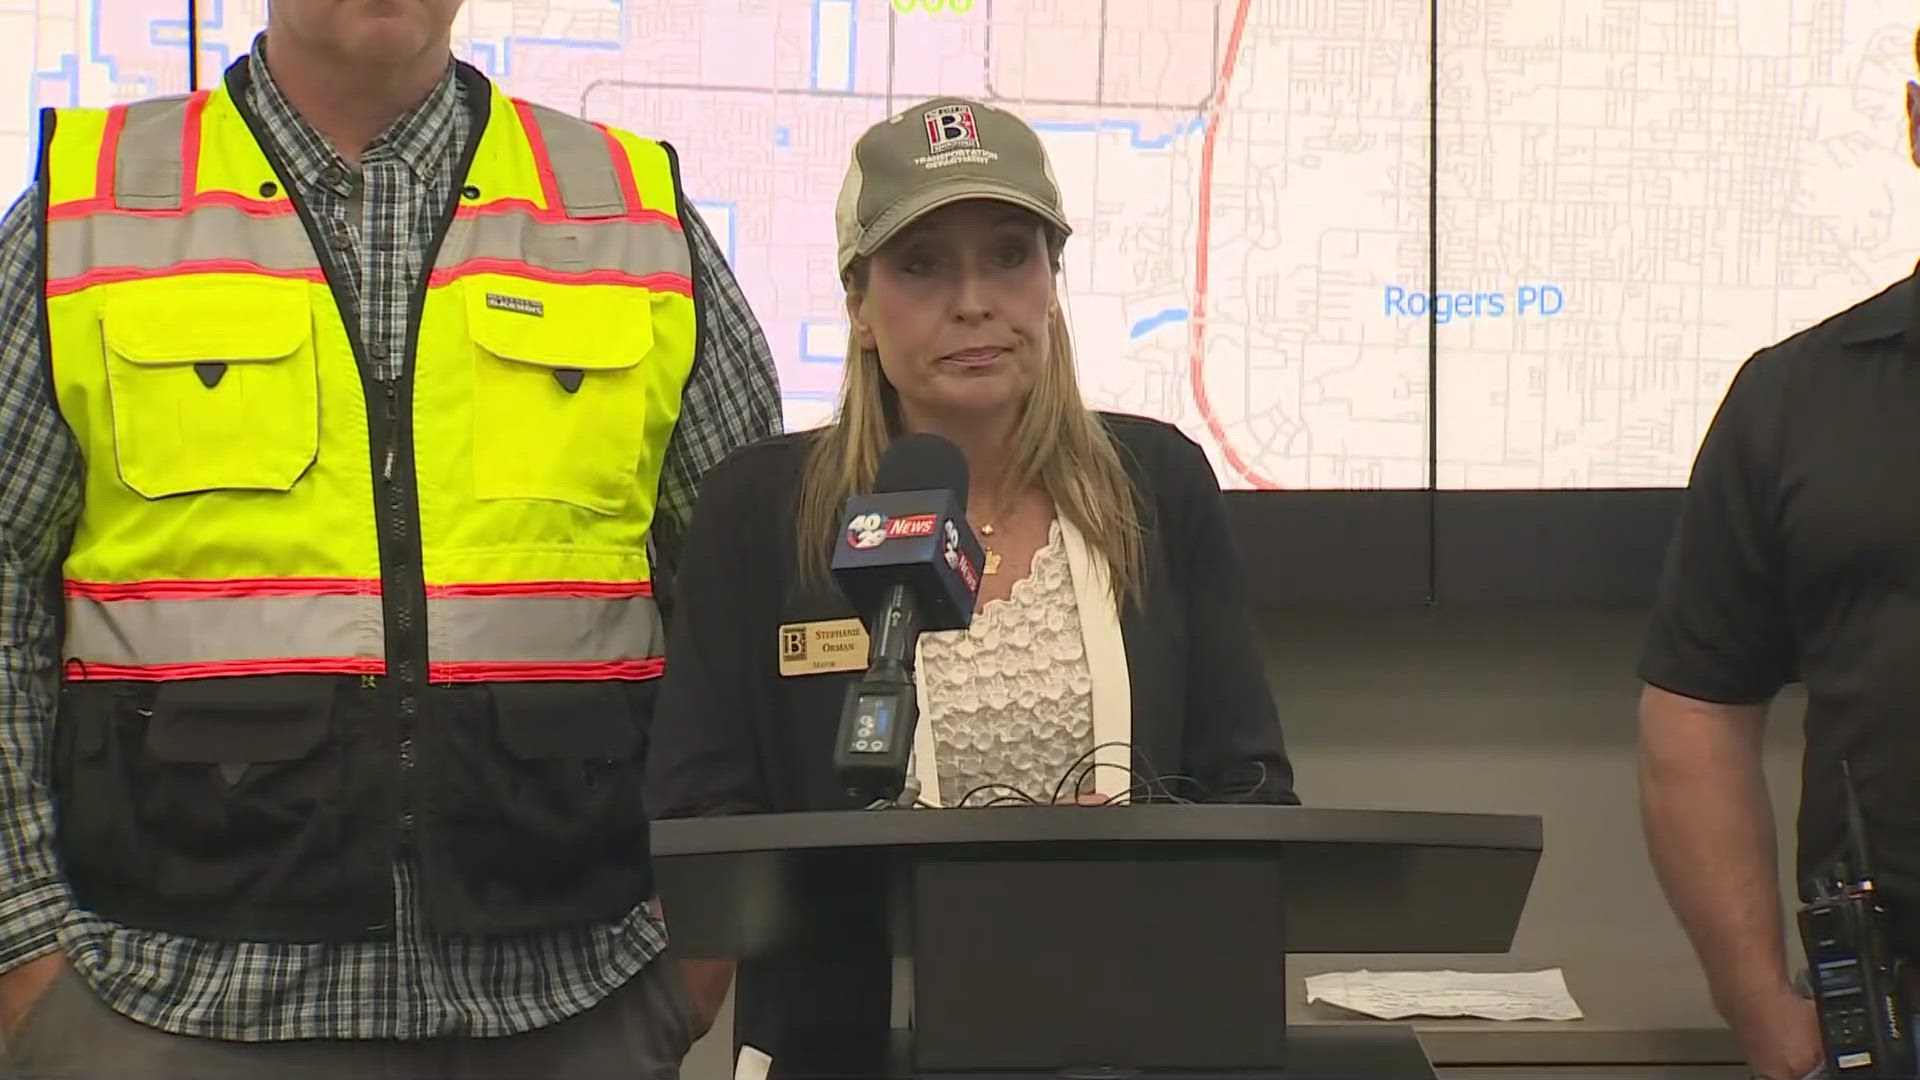 Bentonville city officials held a news conference Sunday morning after overnight storms brought possible tornadoes.